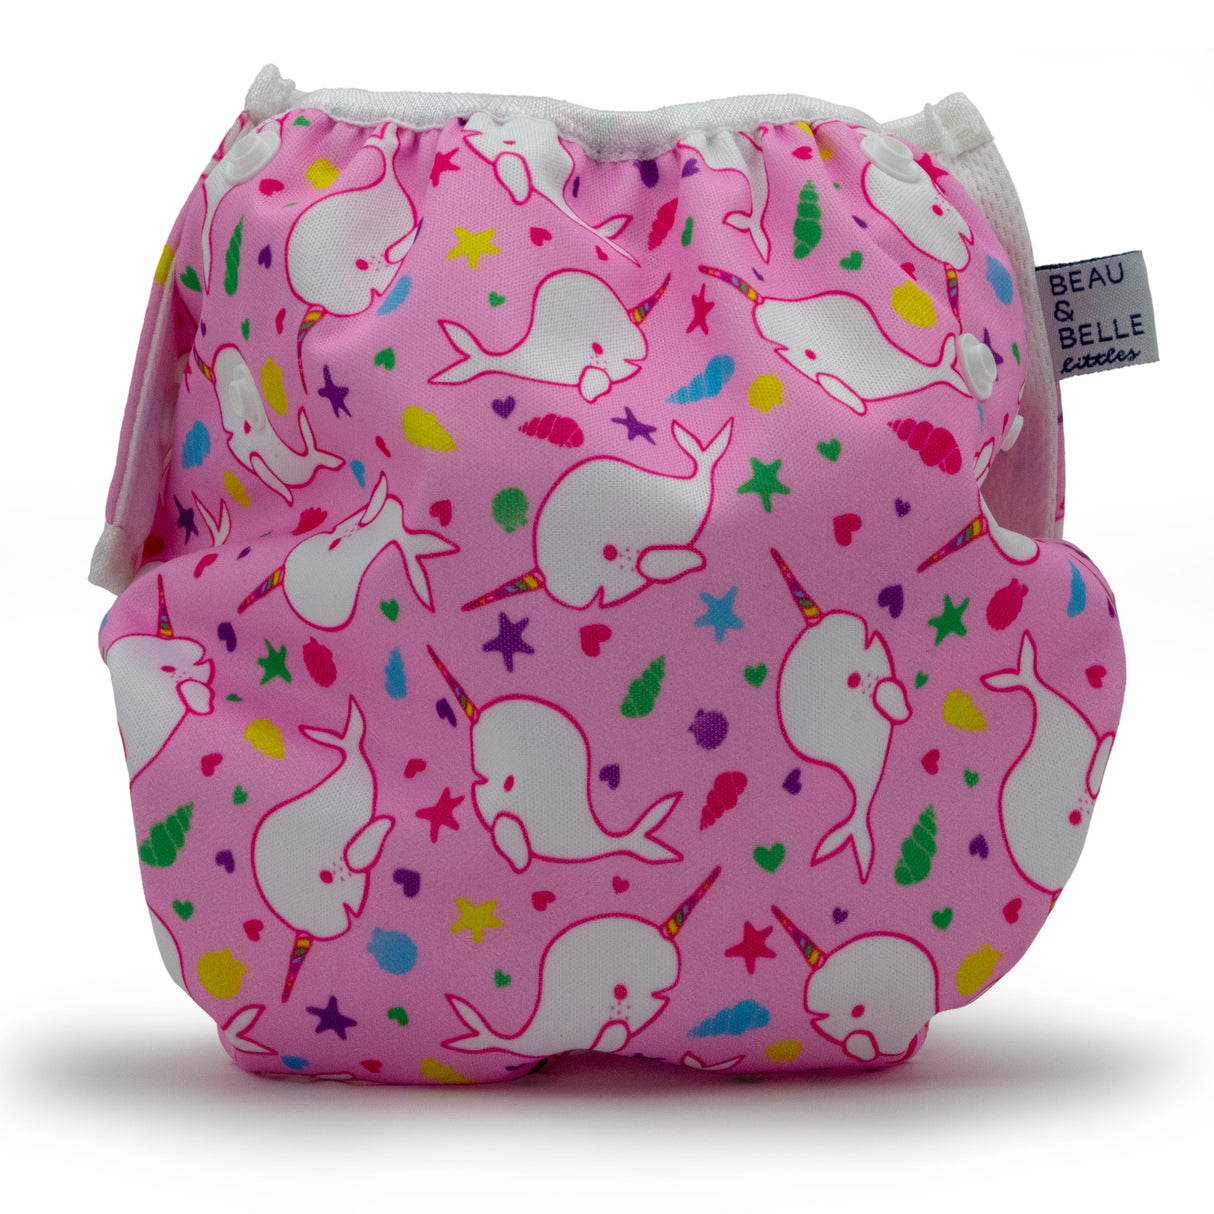 Narwhals 0-3 years Nageuret  Swim Diaper (Light Pink) by Beau & Belle Littles